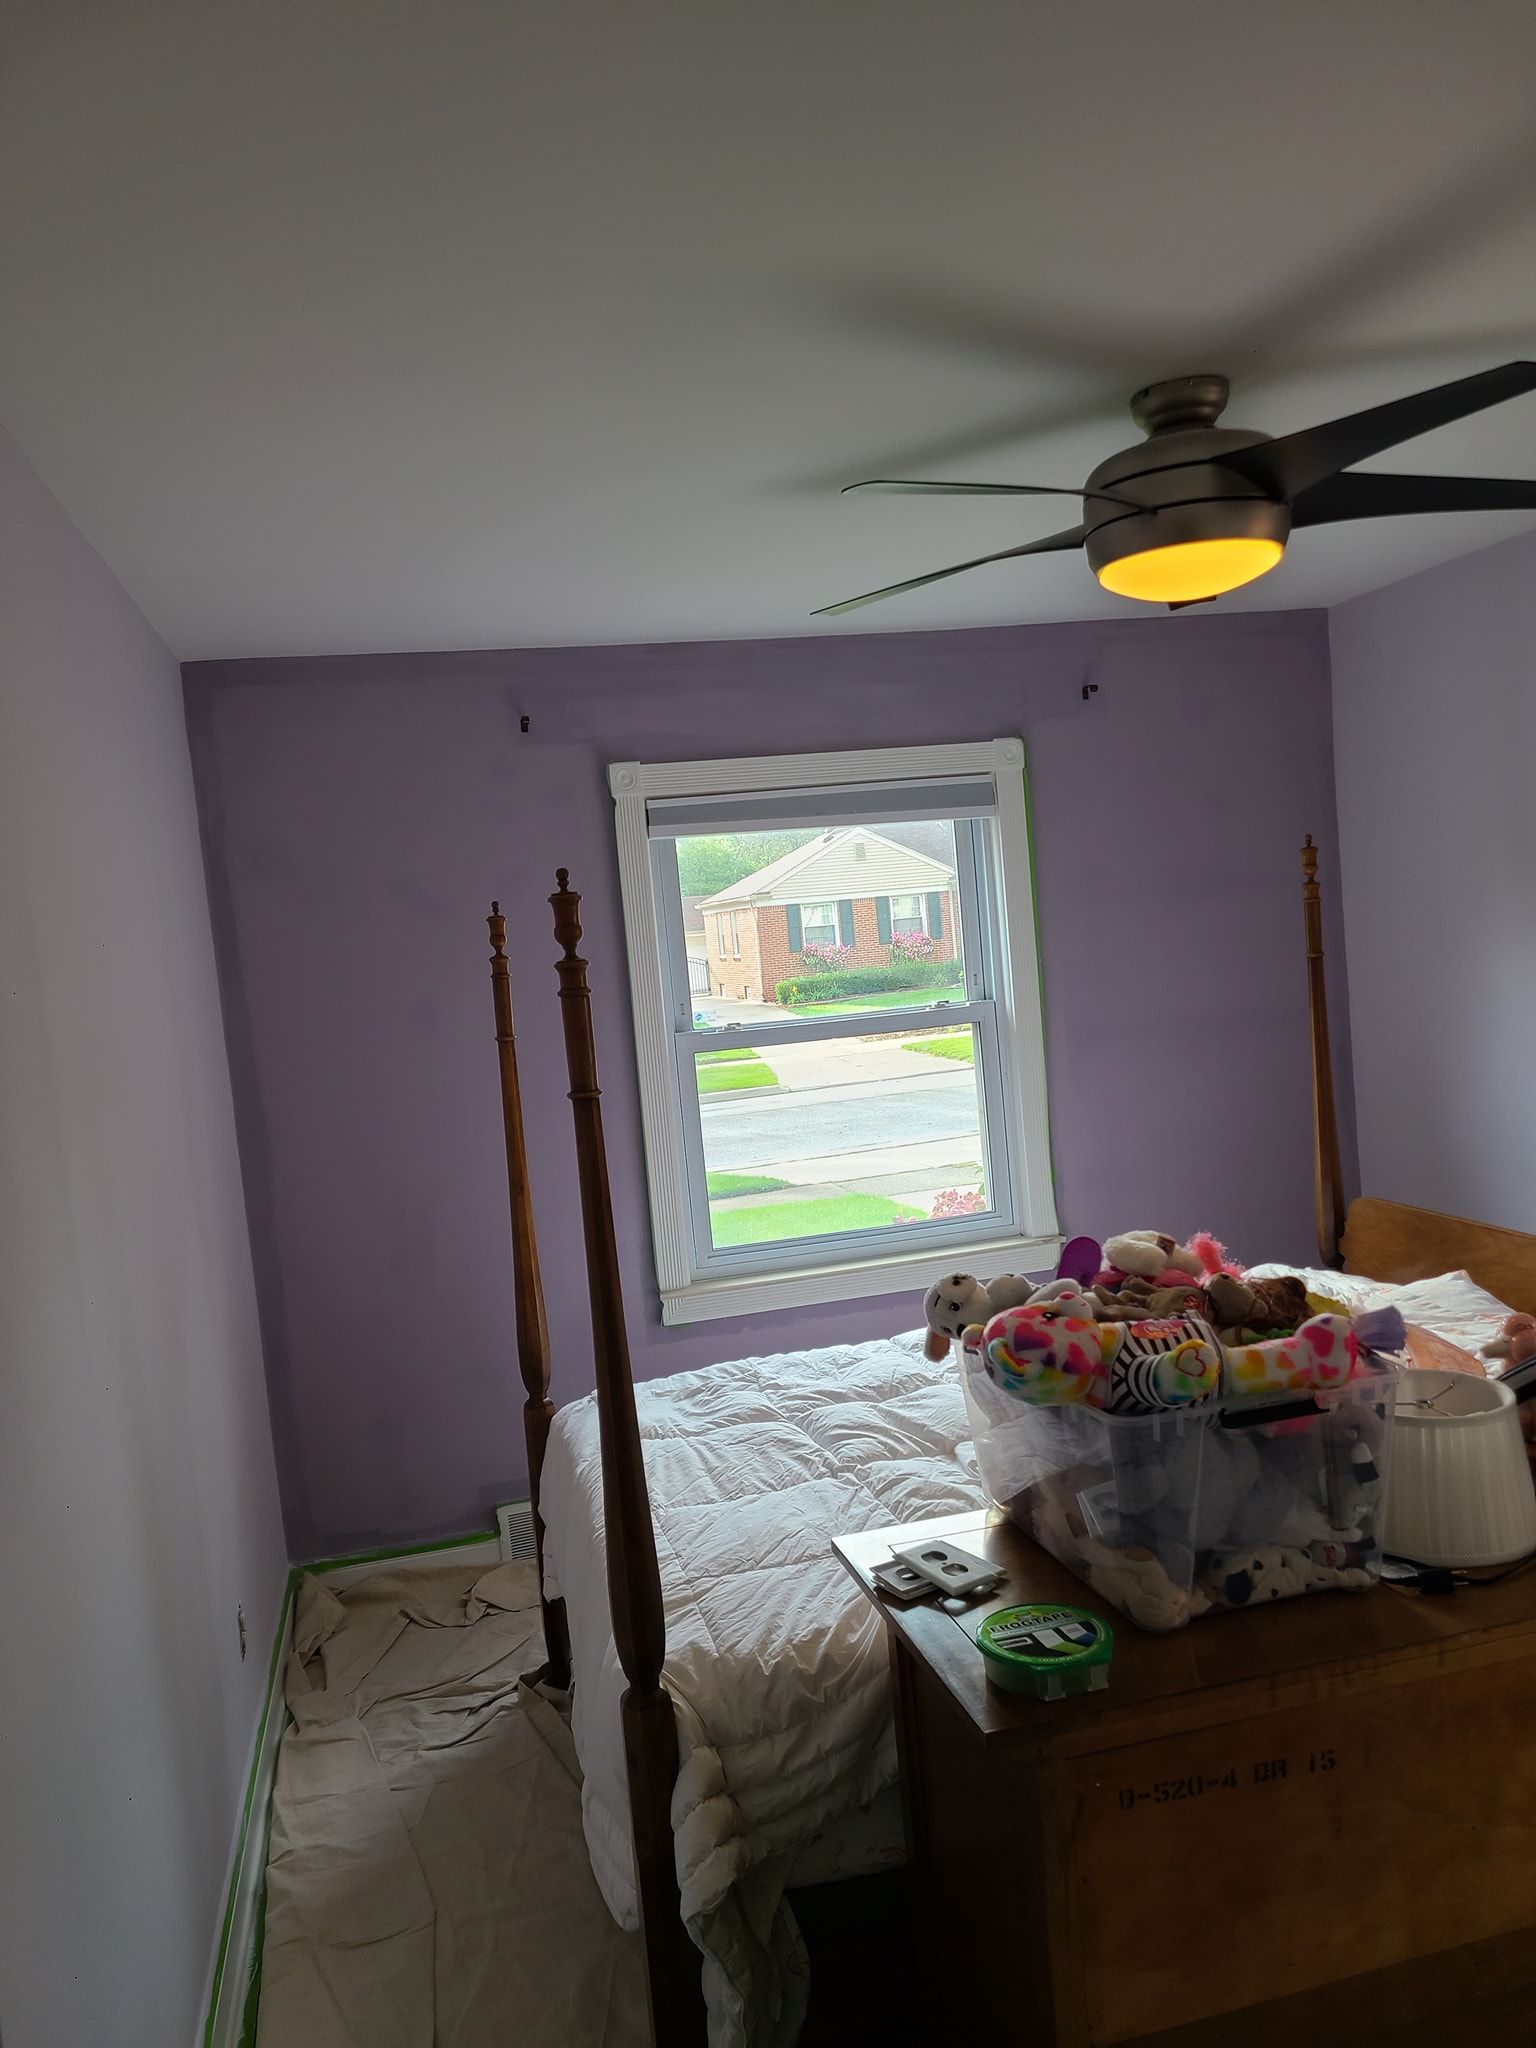 A bedroom with purple walls , a bed , a window and a ceiling fan.